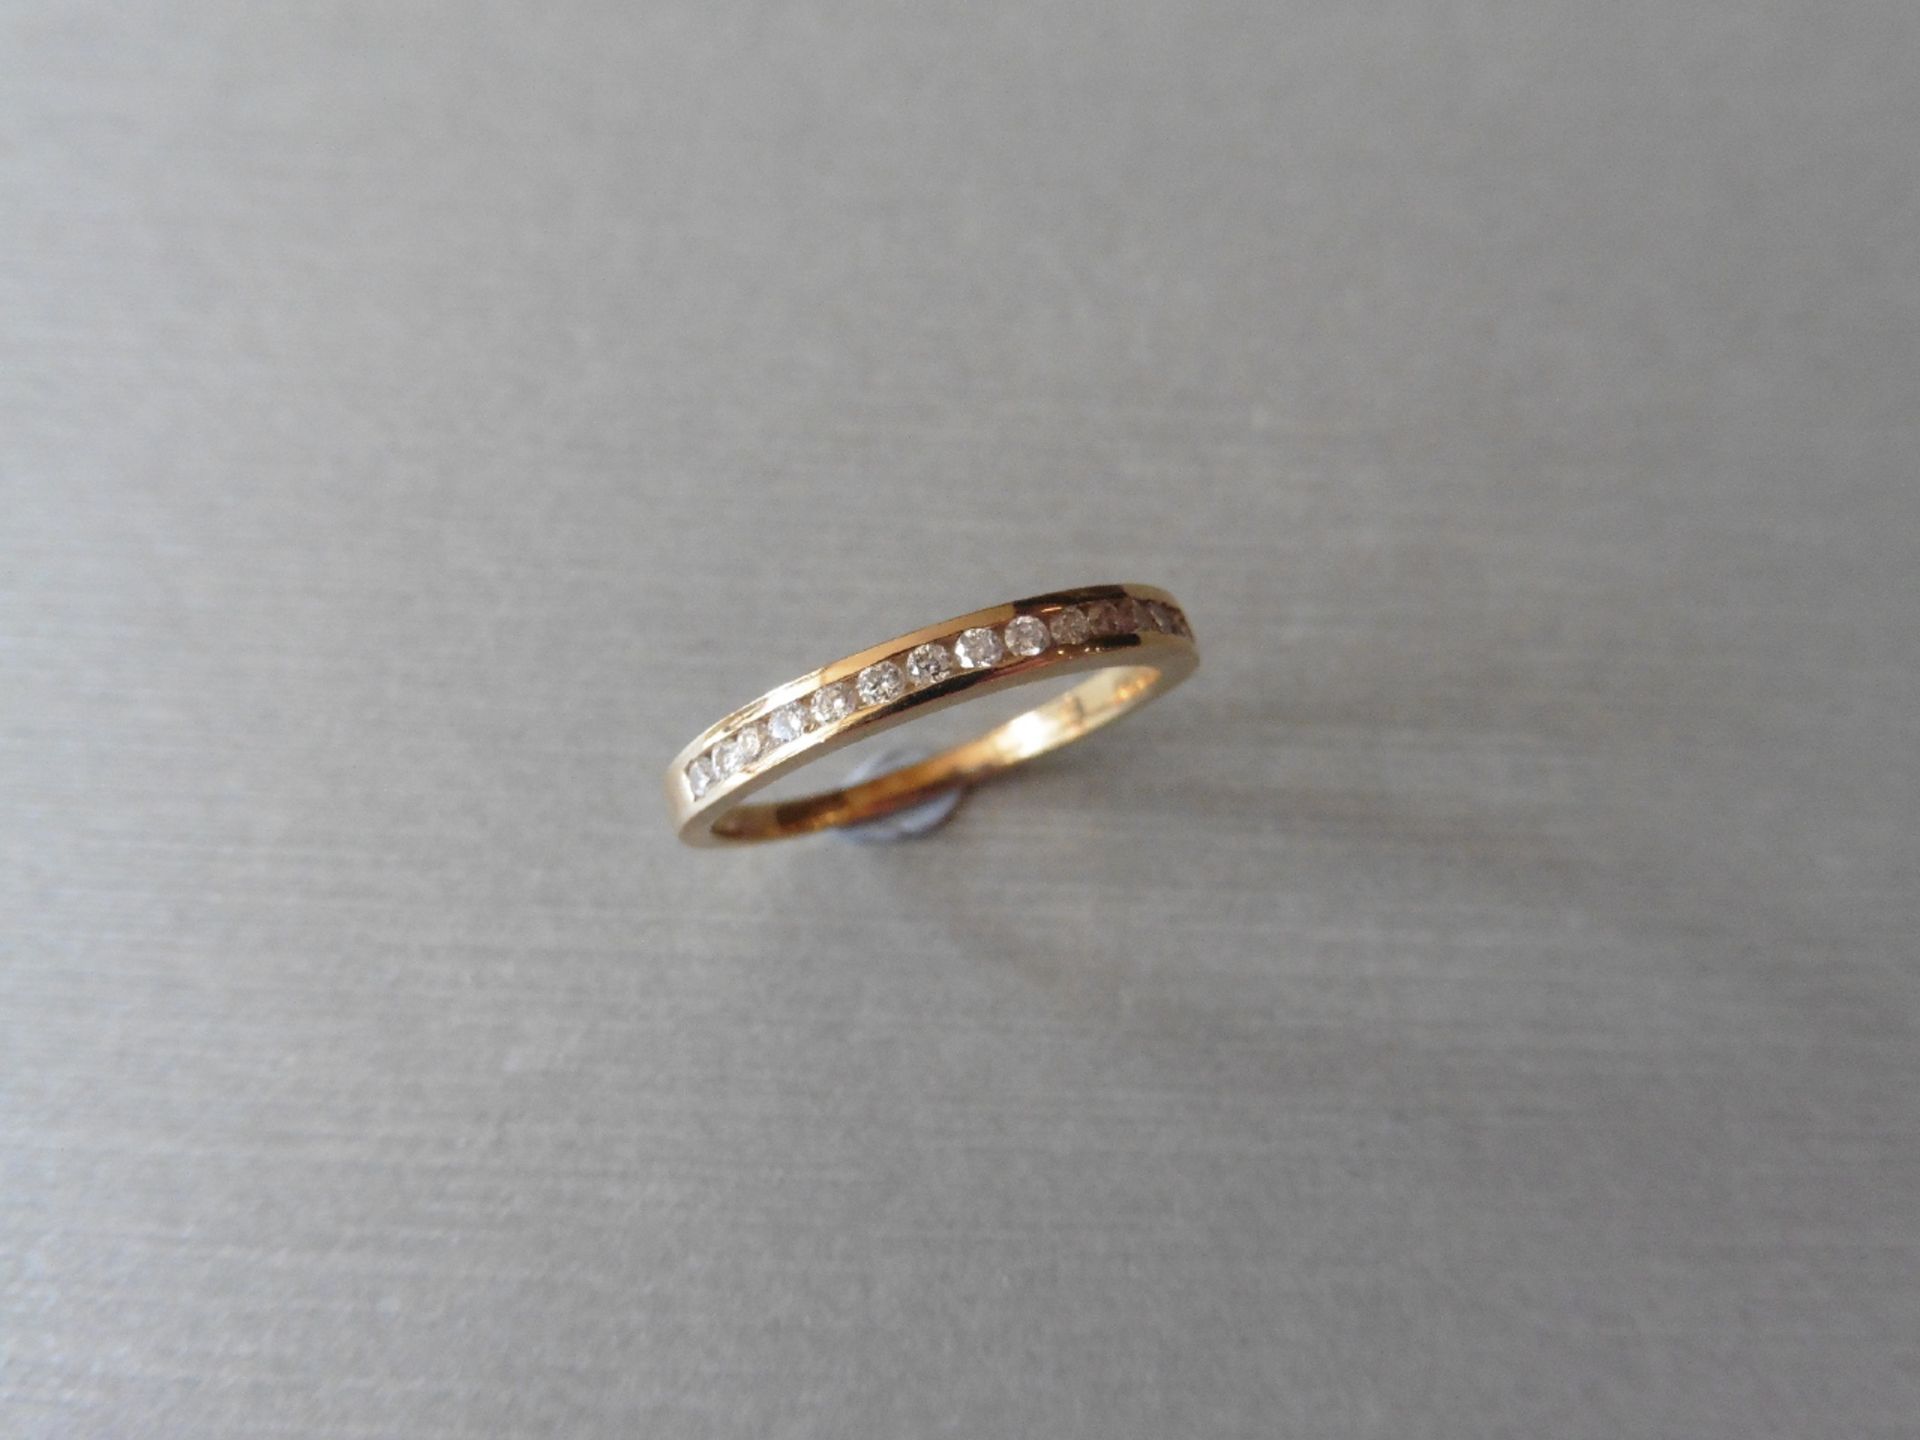 0.15ct diamond eternity ring set in 9ct yellow gold. Channel setting